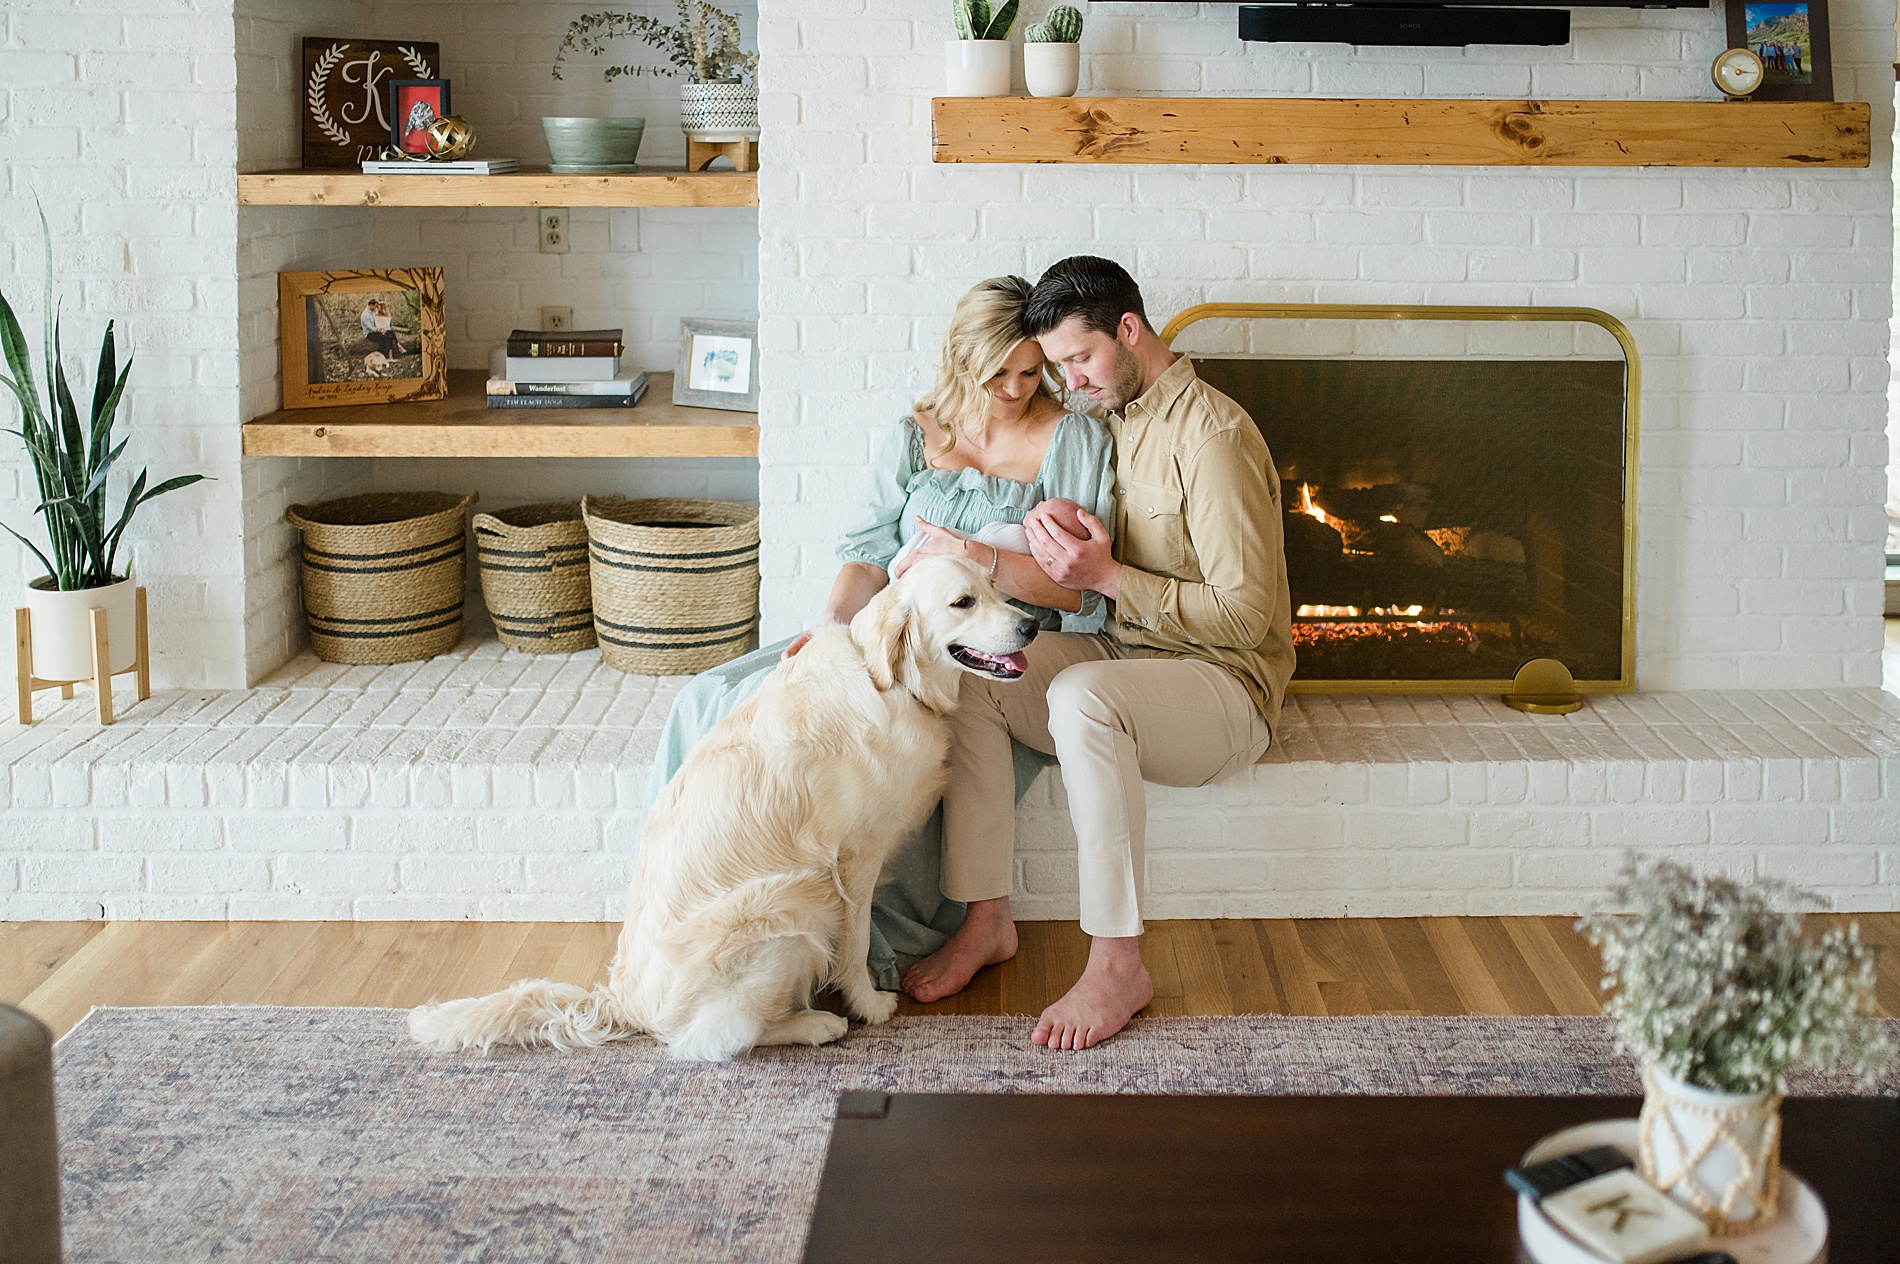 family snuggle newborn son by fireplace during Cozy In-Home Newborn Session photographed by Lindsey Dutton Photography, a Dallas Newborn photographer
